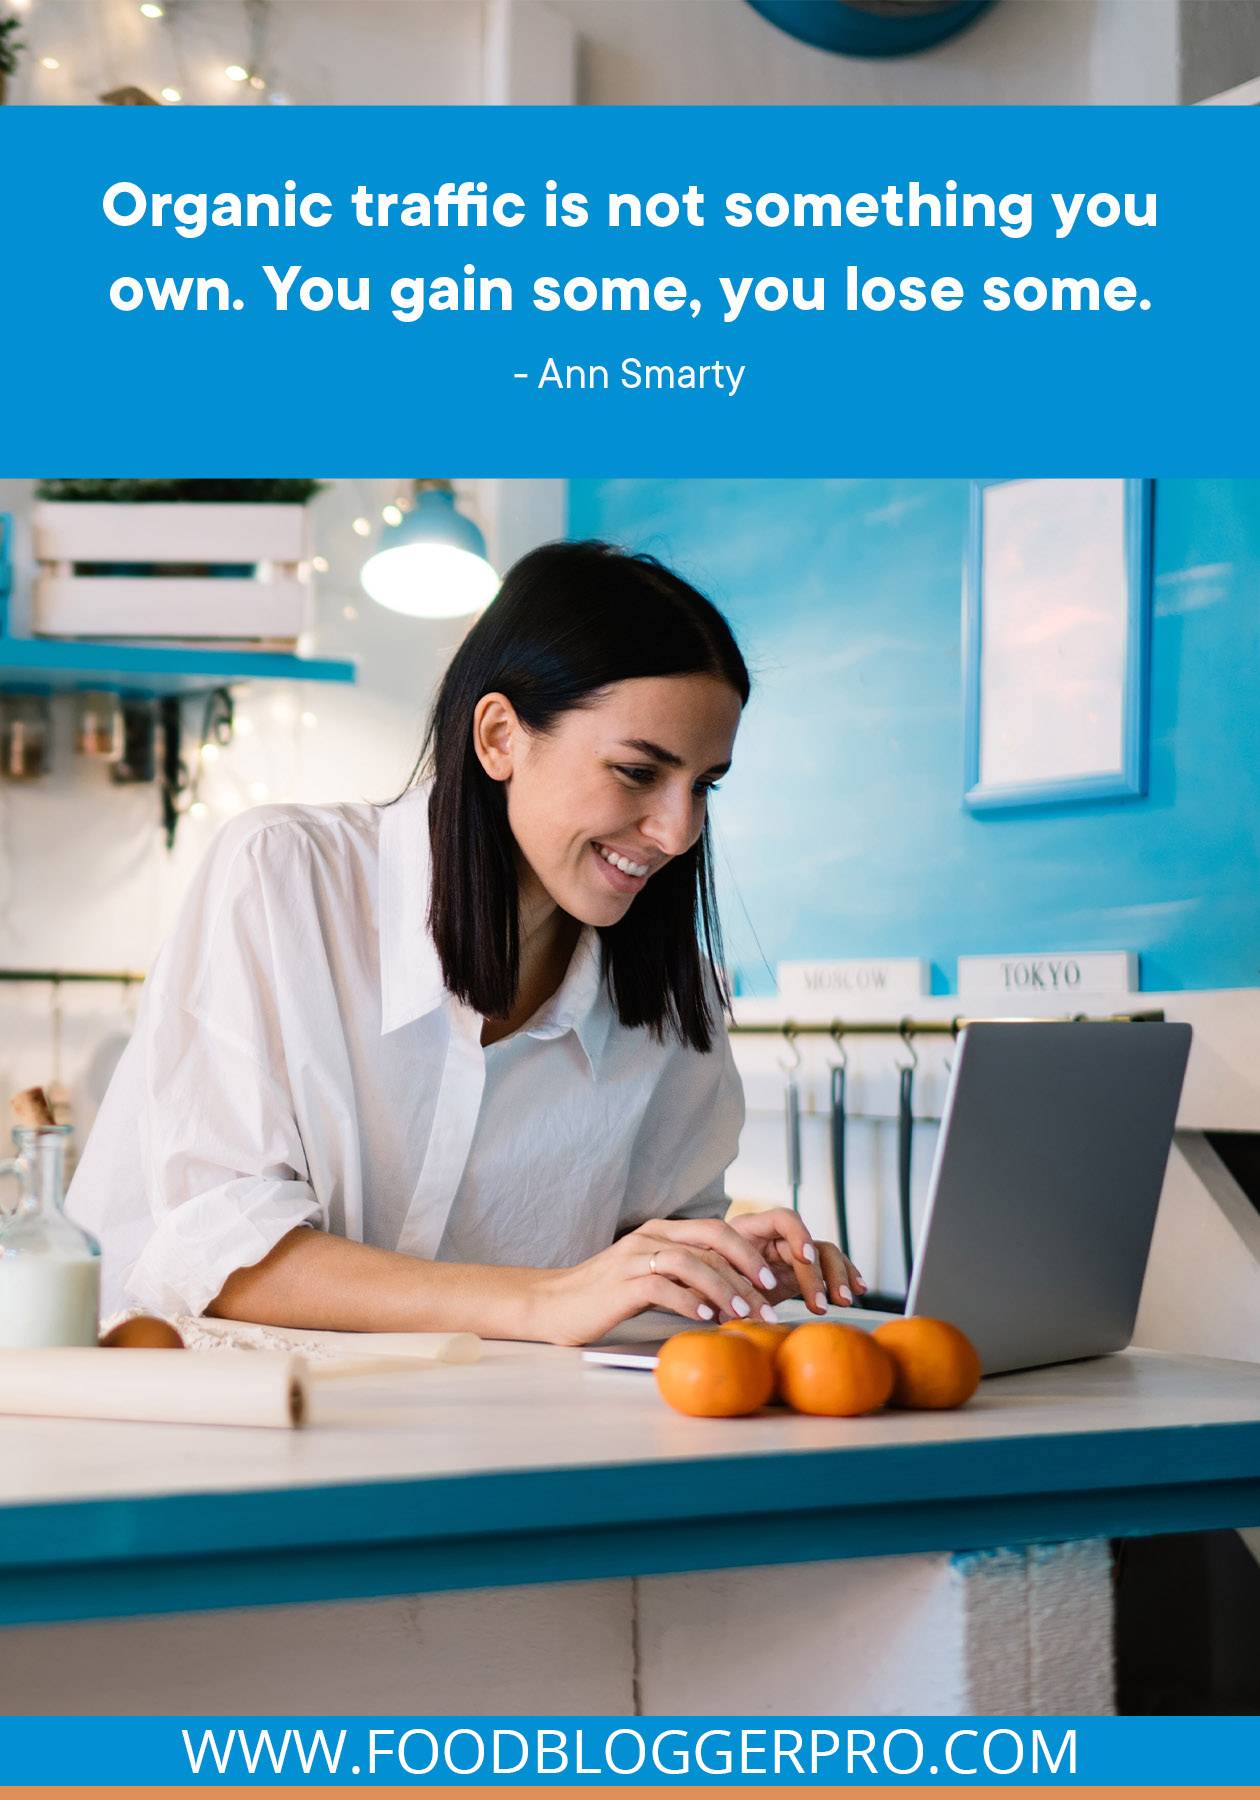 A photograph of a woman typing on a laptop with some clementines next to the laptop and a quote from Ann Smarty's episode of The Food Blogger Pro Podcast that reads: "Organic traffic is not something you own. You gain some, you lose some."